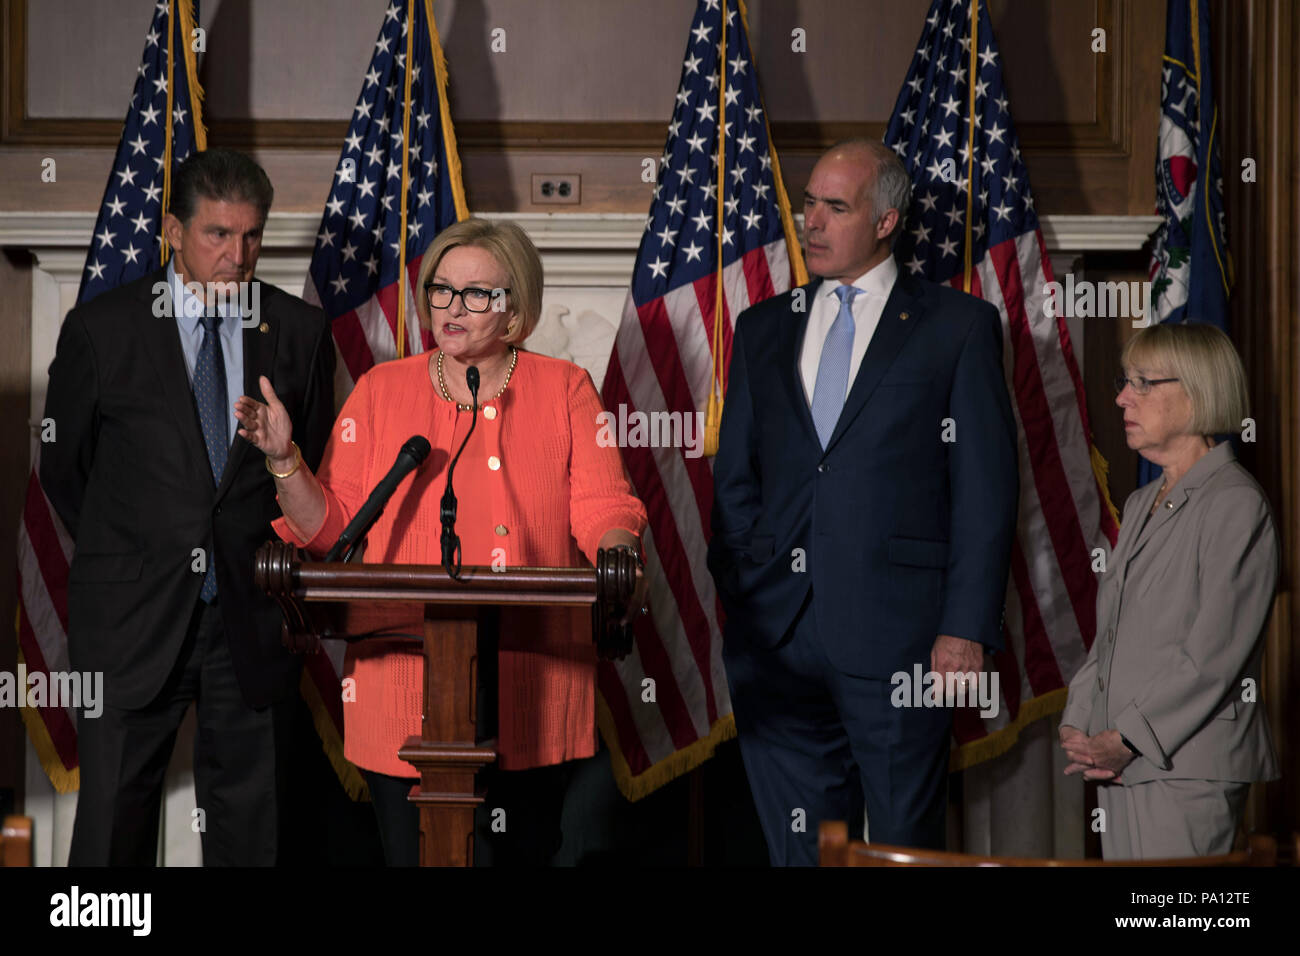 Washington DC, USA. 19th July, 2018. U.S. Senator Claire McCaskill of Missouri, joined by fellow democrats, calls for protecting pre-existing conditions in health insurance policies during a news conference on Capitol Hill July 19, 2018 in Washington, D.C. Standing from left to right are: Sen. Joe Manchin, Sen. Claire McCaskill, Sen. Bob Casey, and Sen. Patty Murray. Credit: Planetpix/Alamy Live News Stock Photo